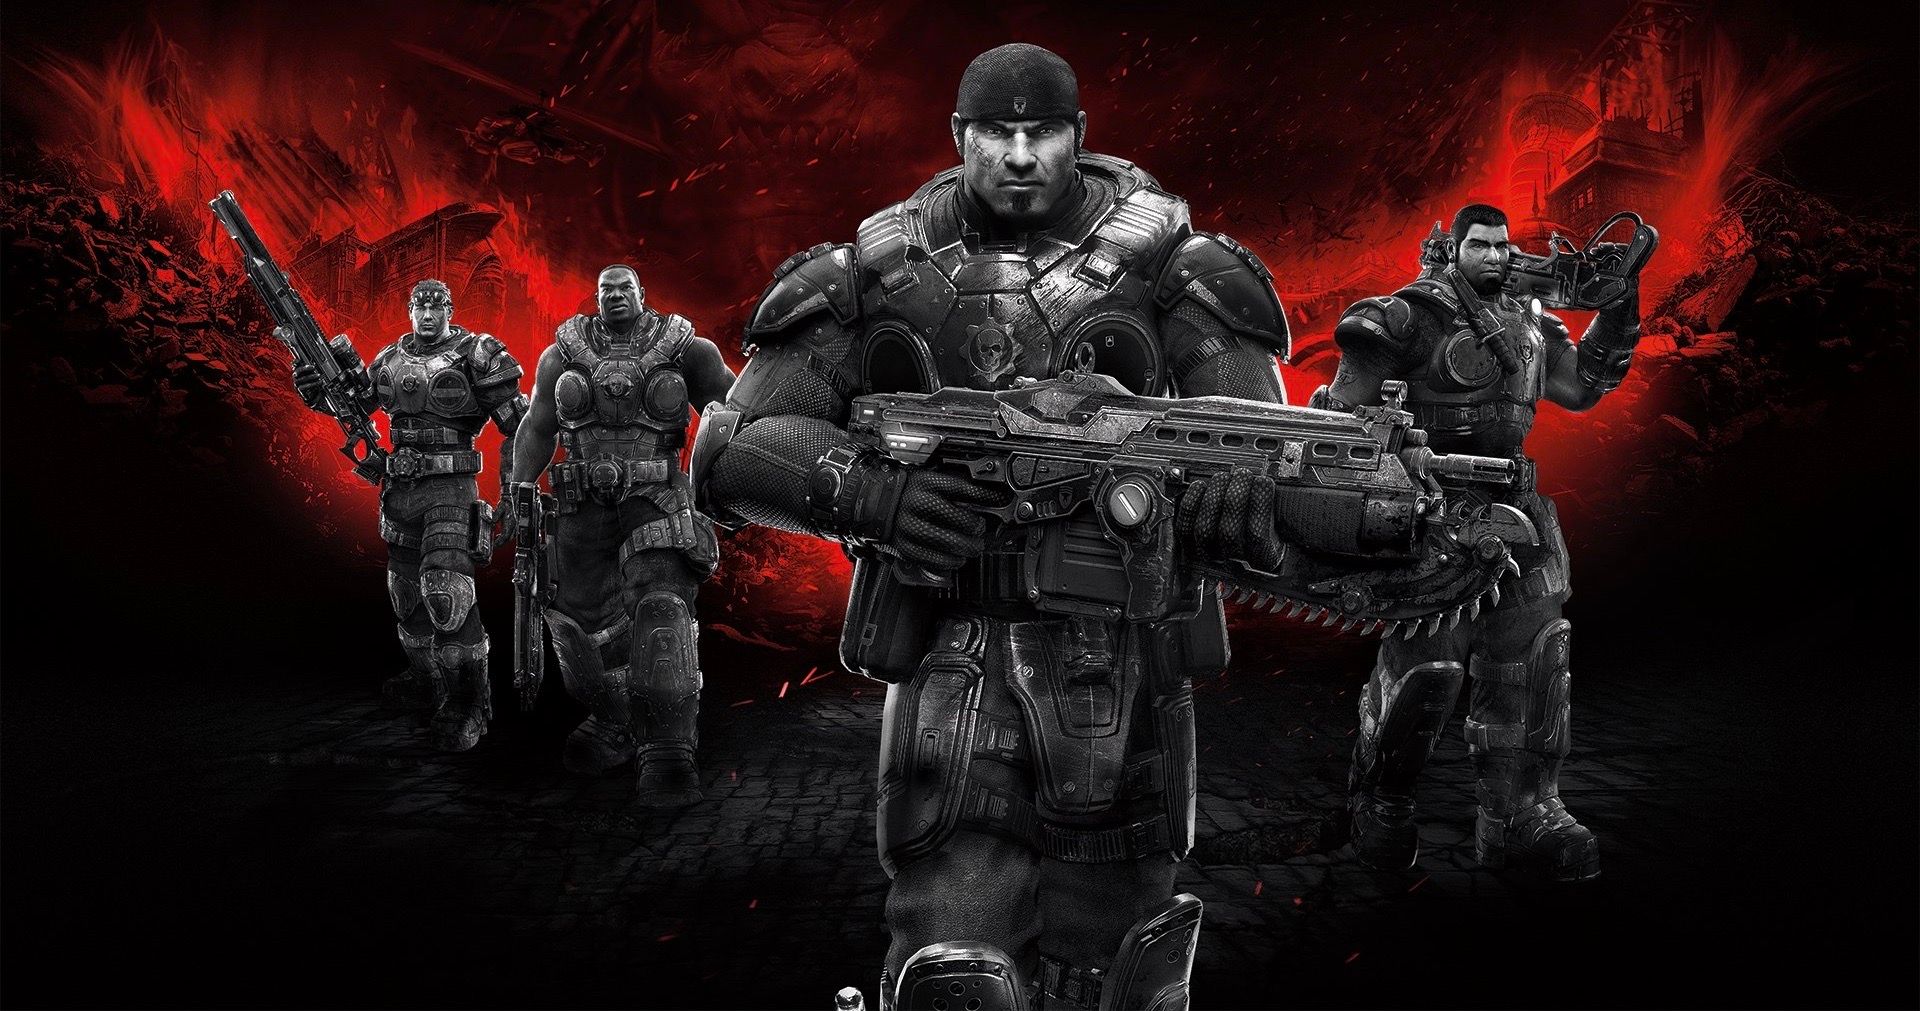 download free xbox one gears of war edition